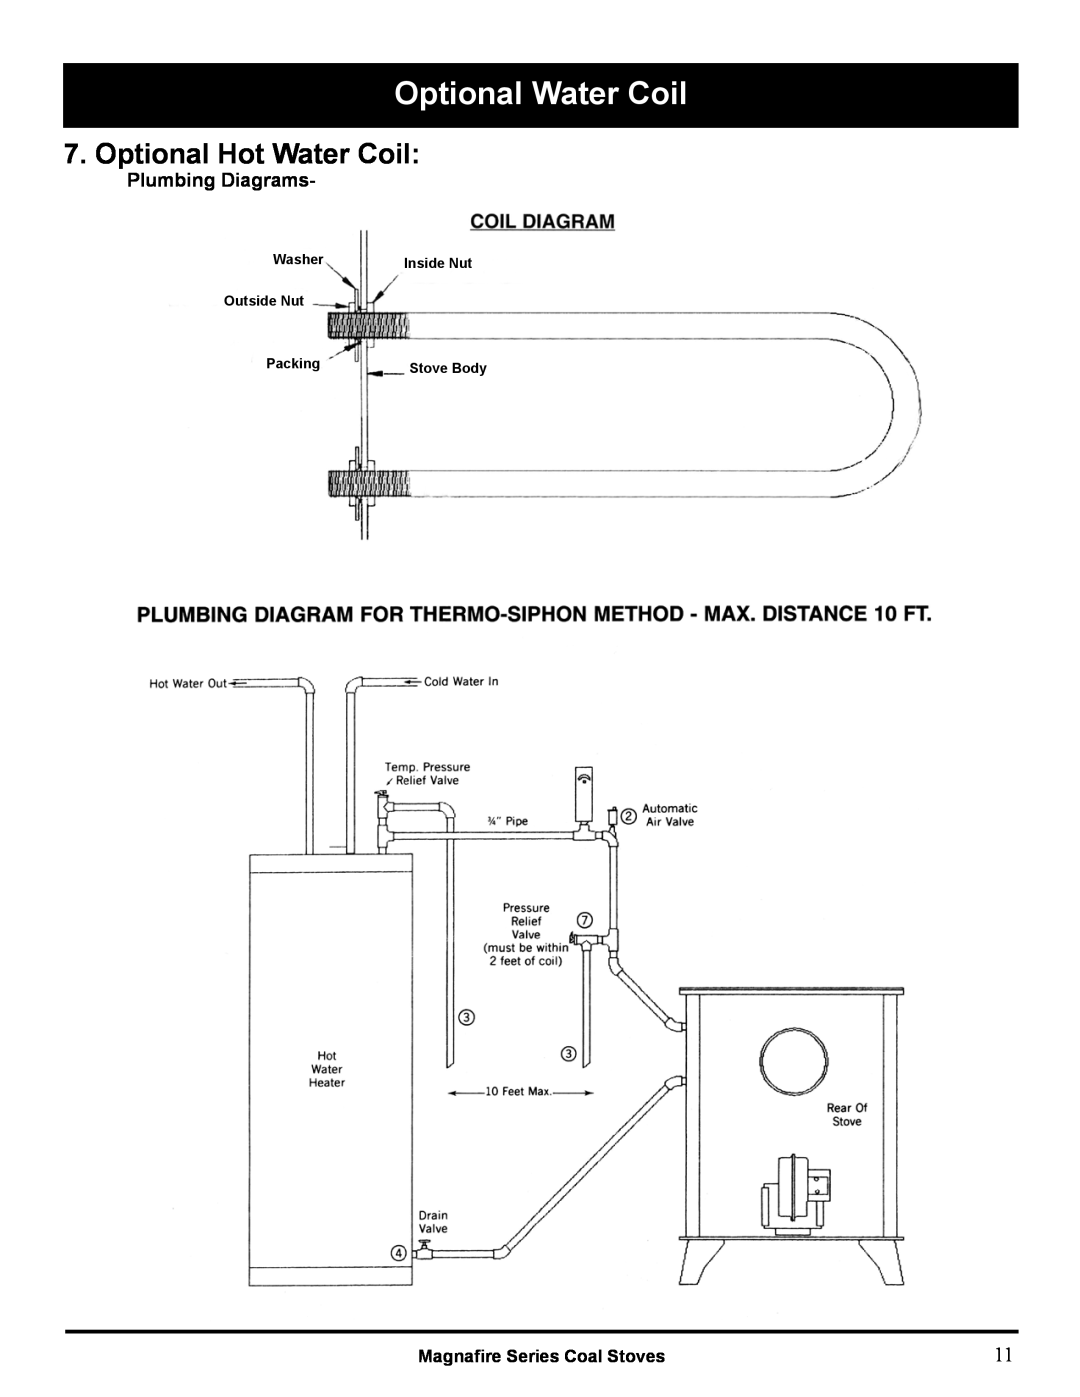 Harman Stove Company MARK III manual Optional Water Coil, Optional Hot Water Coil, Plumbing Diagrams, Washer, Outside Nut 